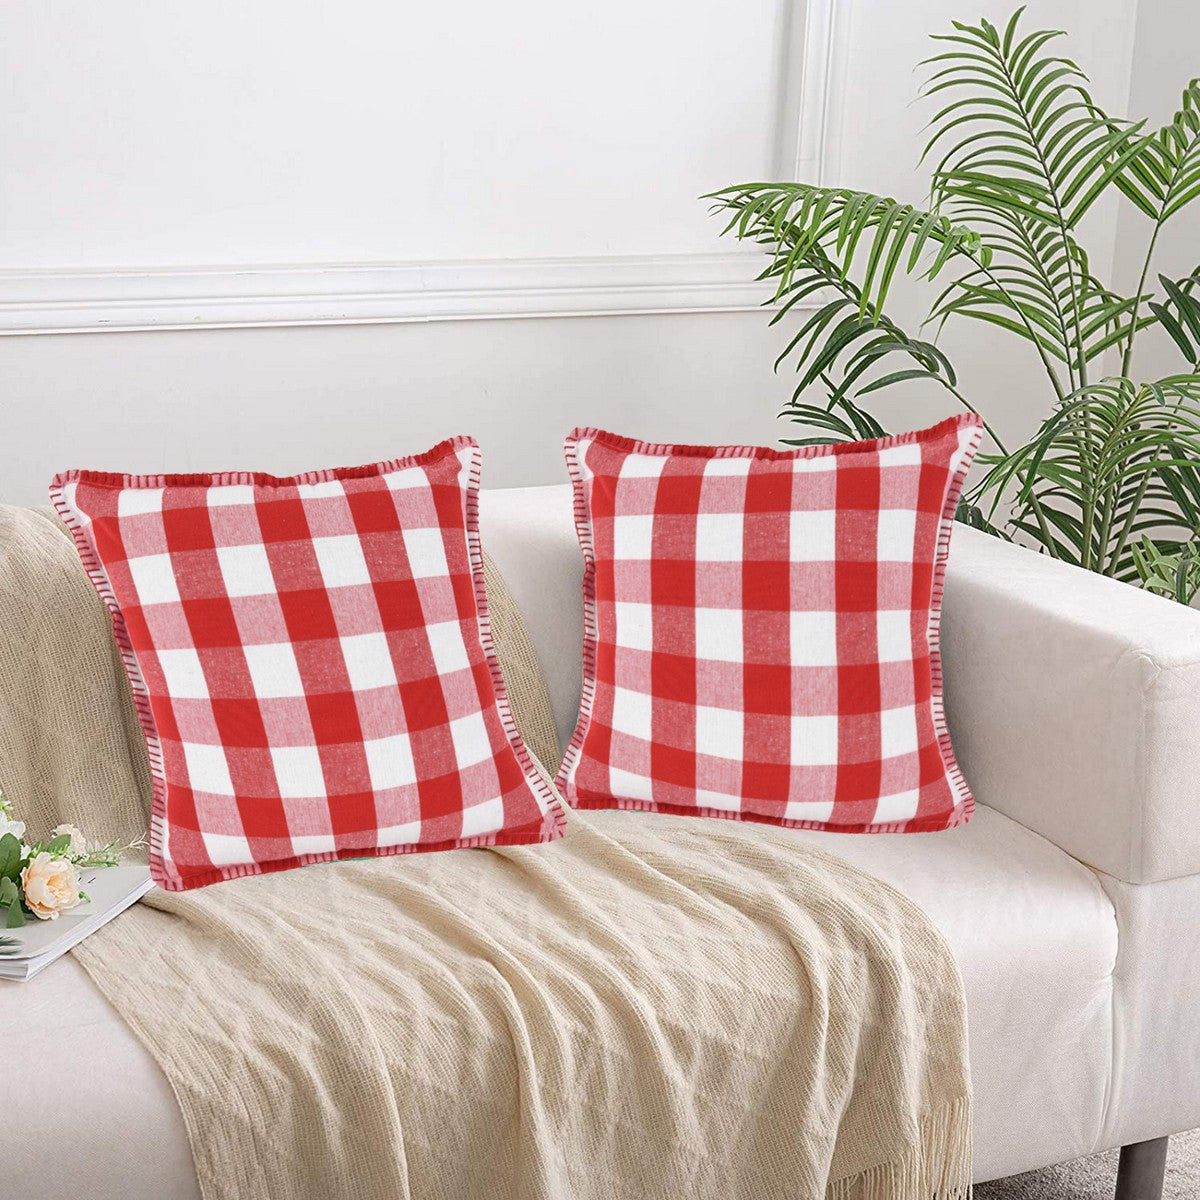 Lushomes Square Cushion Cover with Blanket Stitch, Cotton Sofa Pillow Cover Set of 2, 16x16 Inch, Big Checks, Red and White Checks, Pillow Cushions Covers (Pack of 2, 40x40 Cms)